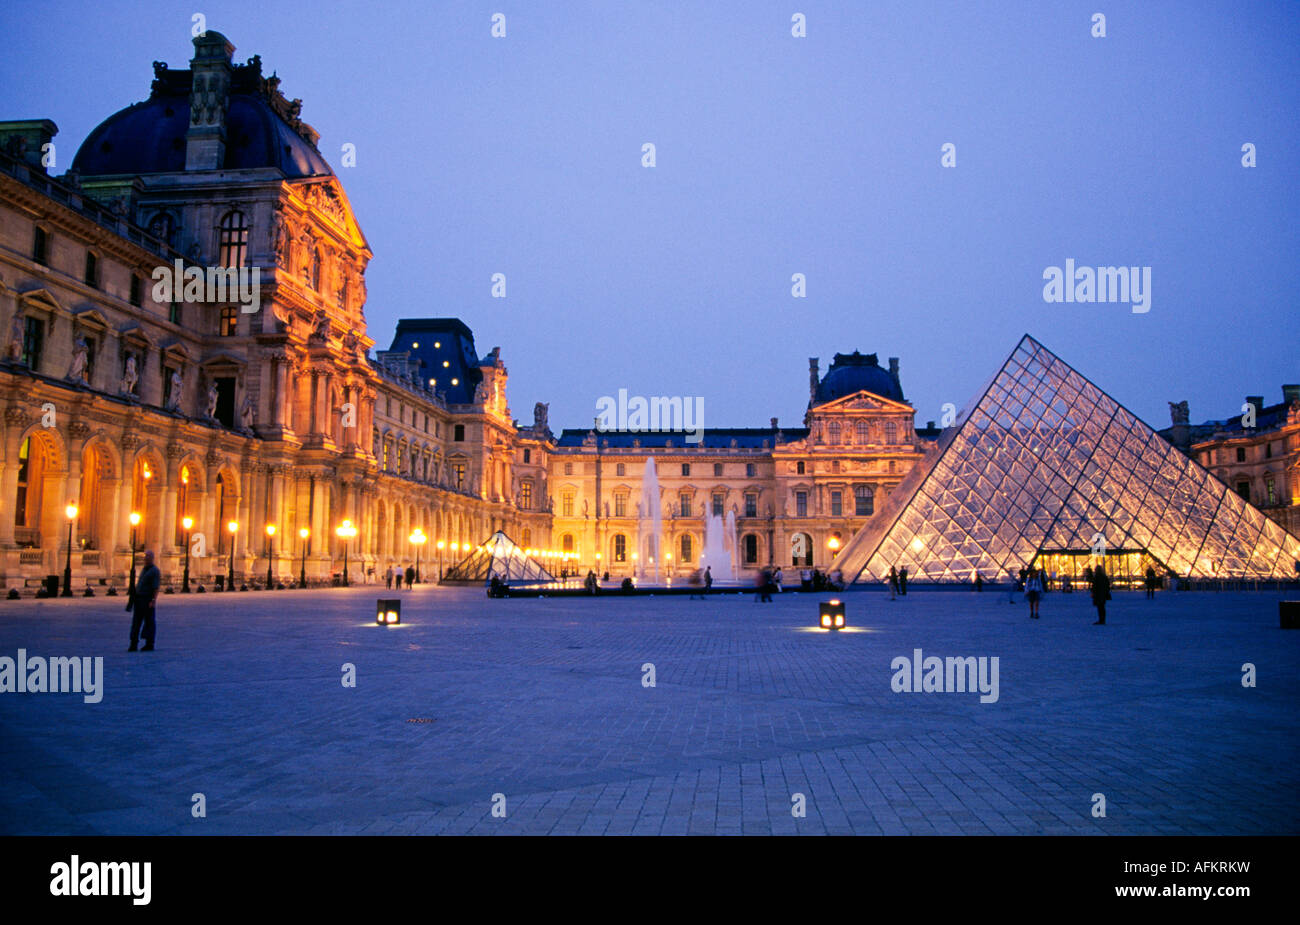 The Louvre Museum Musée du Louvre in Paris France is one of the largest and most famous museums in the world Stock Photo